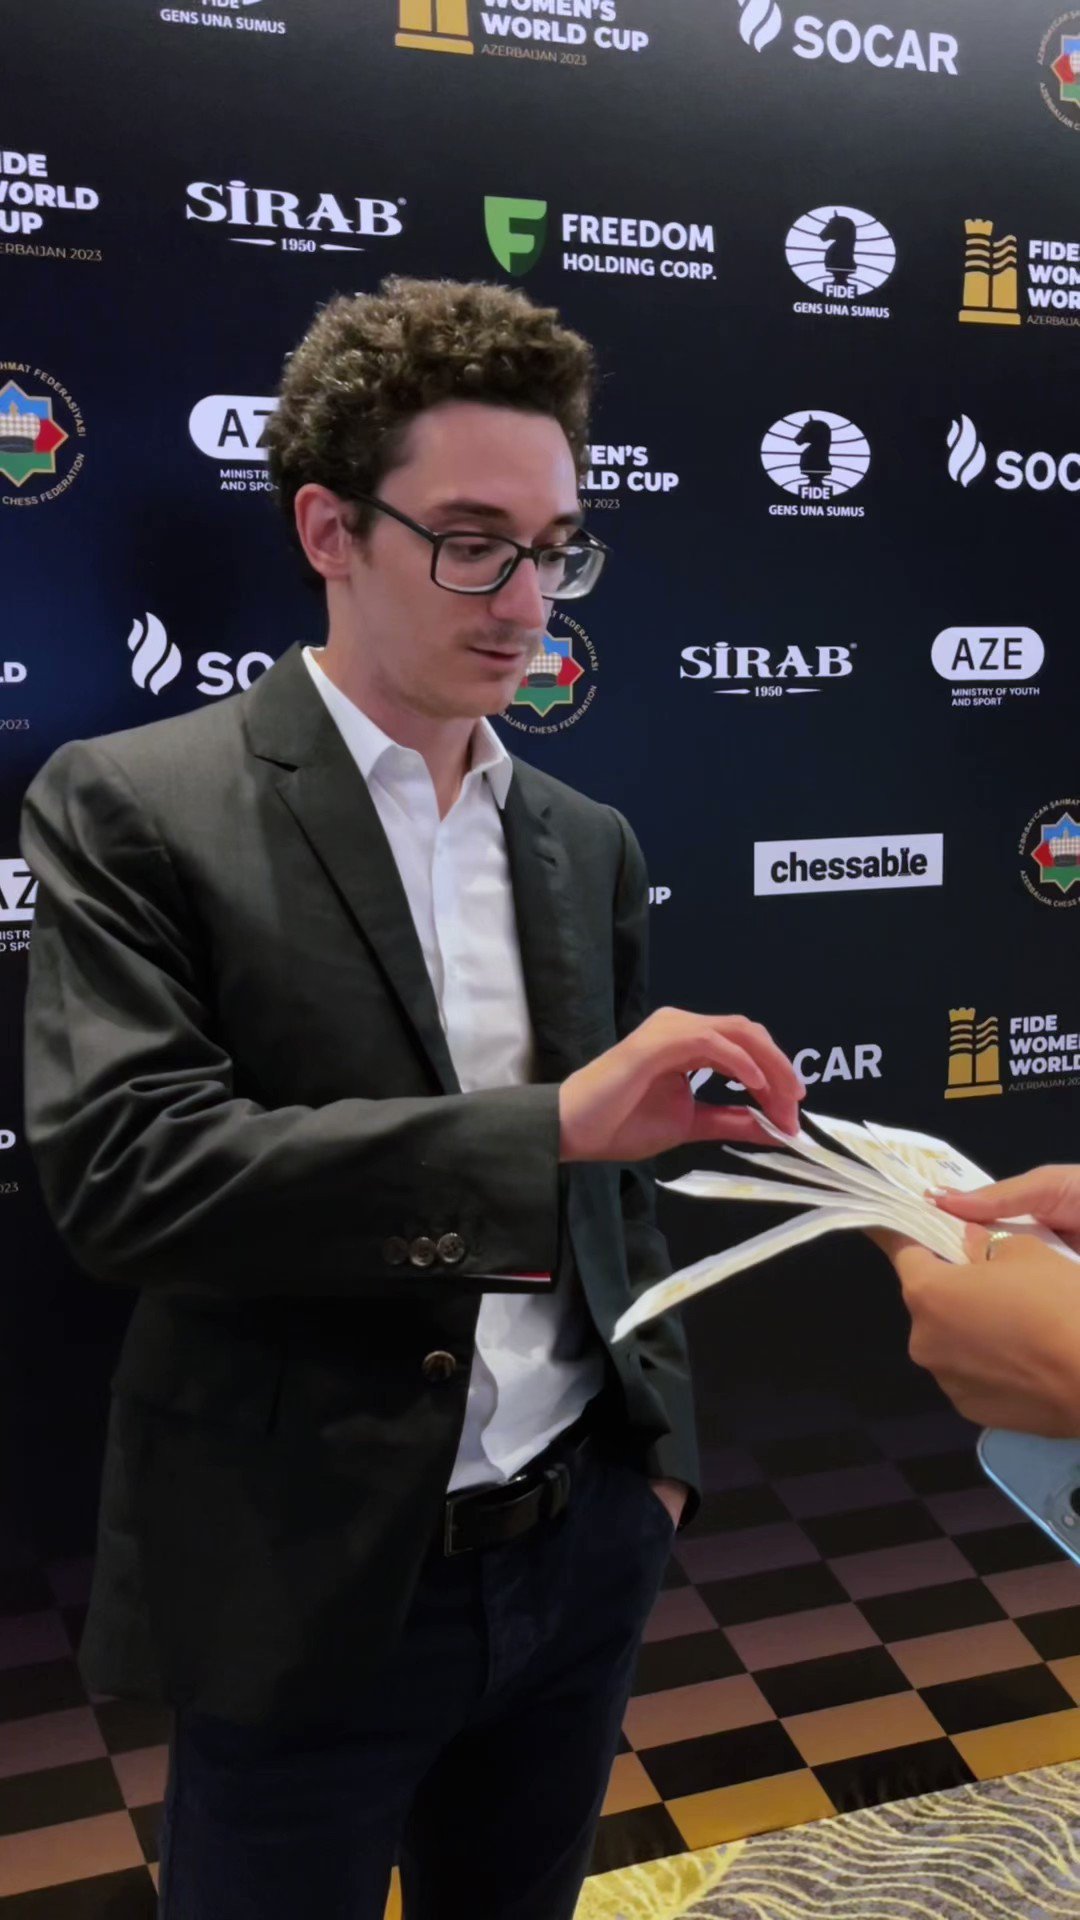 International Chess Federation on X: 3 days until the #FIDECandidates!  Meet the player: Fabiano Caruana The Italian-American Grandmaster  @FabianoCaruana is a regular on the top chess circuit and one of the most